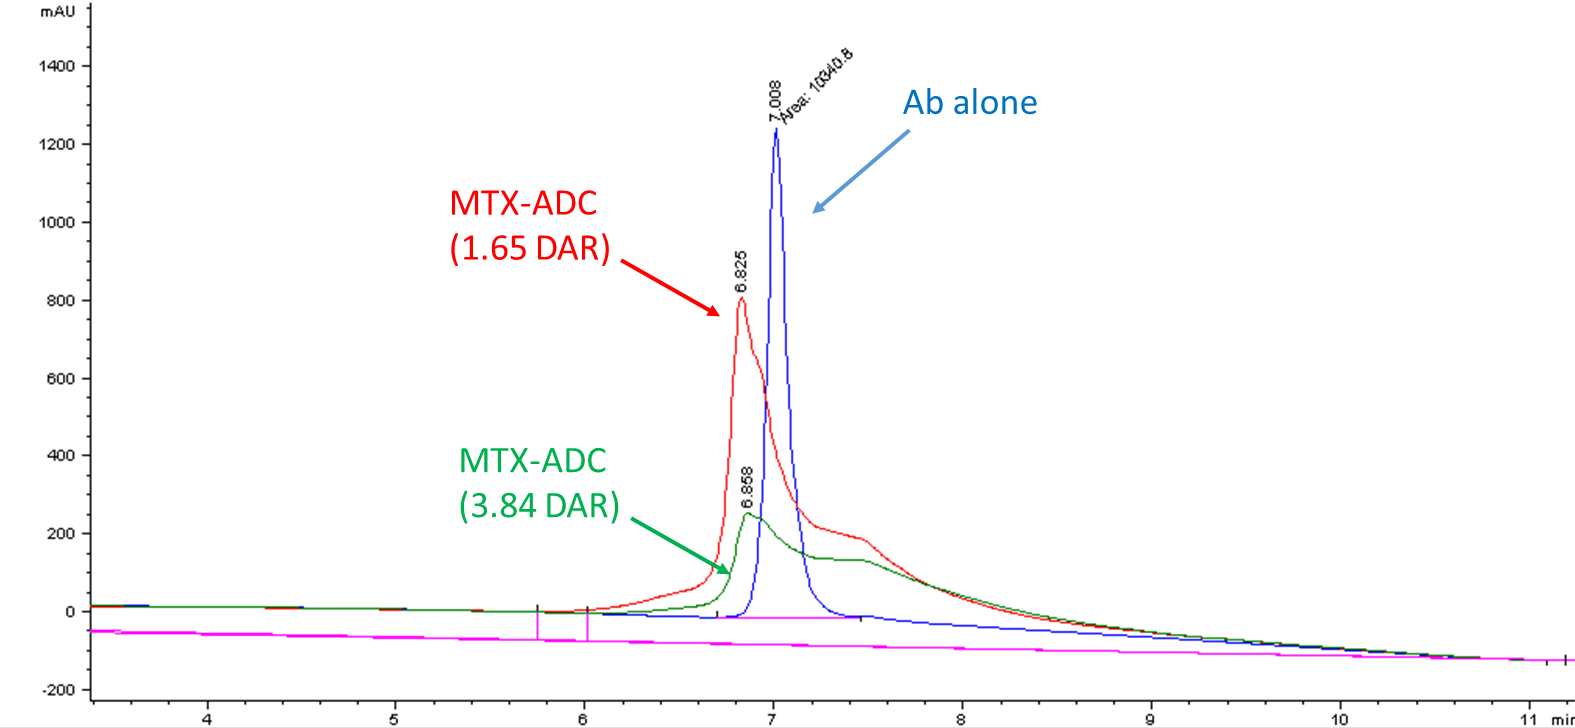 CM11407 HIC HPLC Analysis of unlabeled antibody and methotrexate ADC with DAR of 1.65 and 3.84